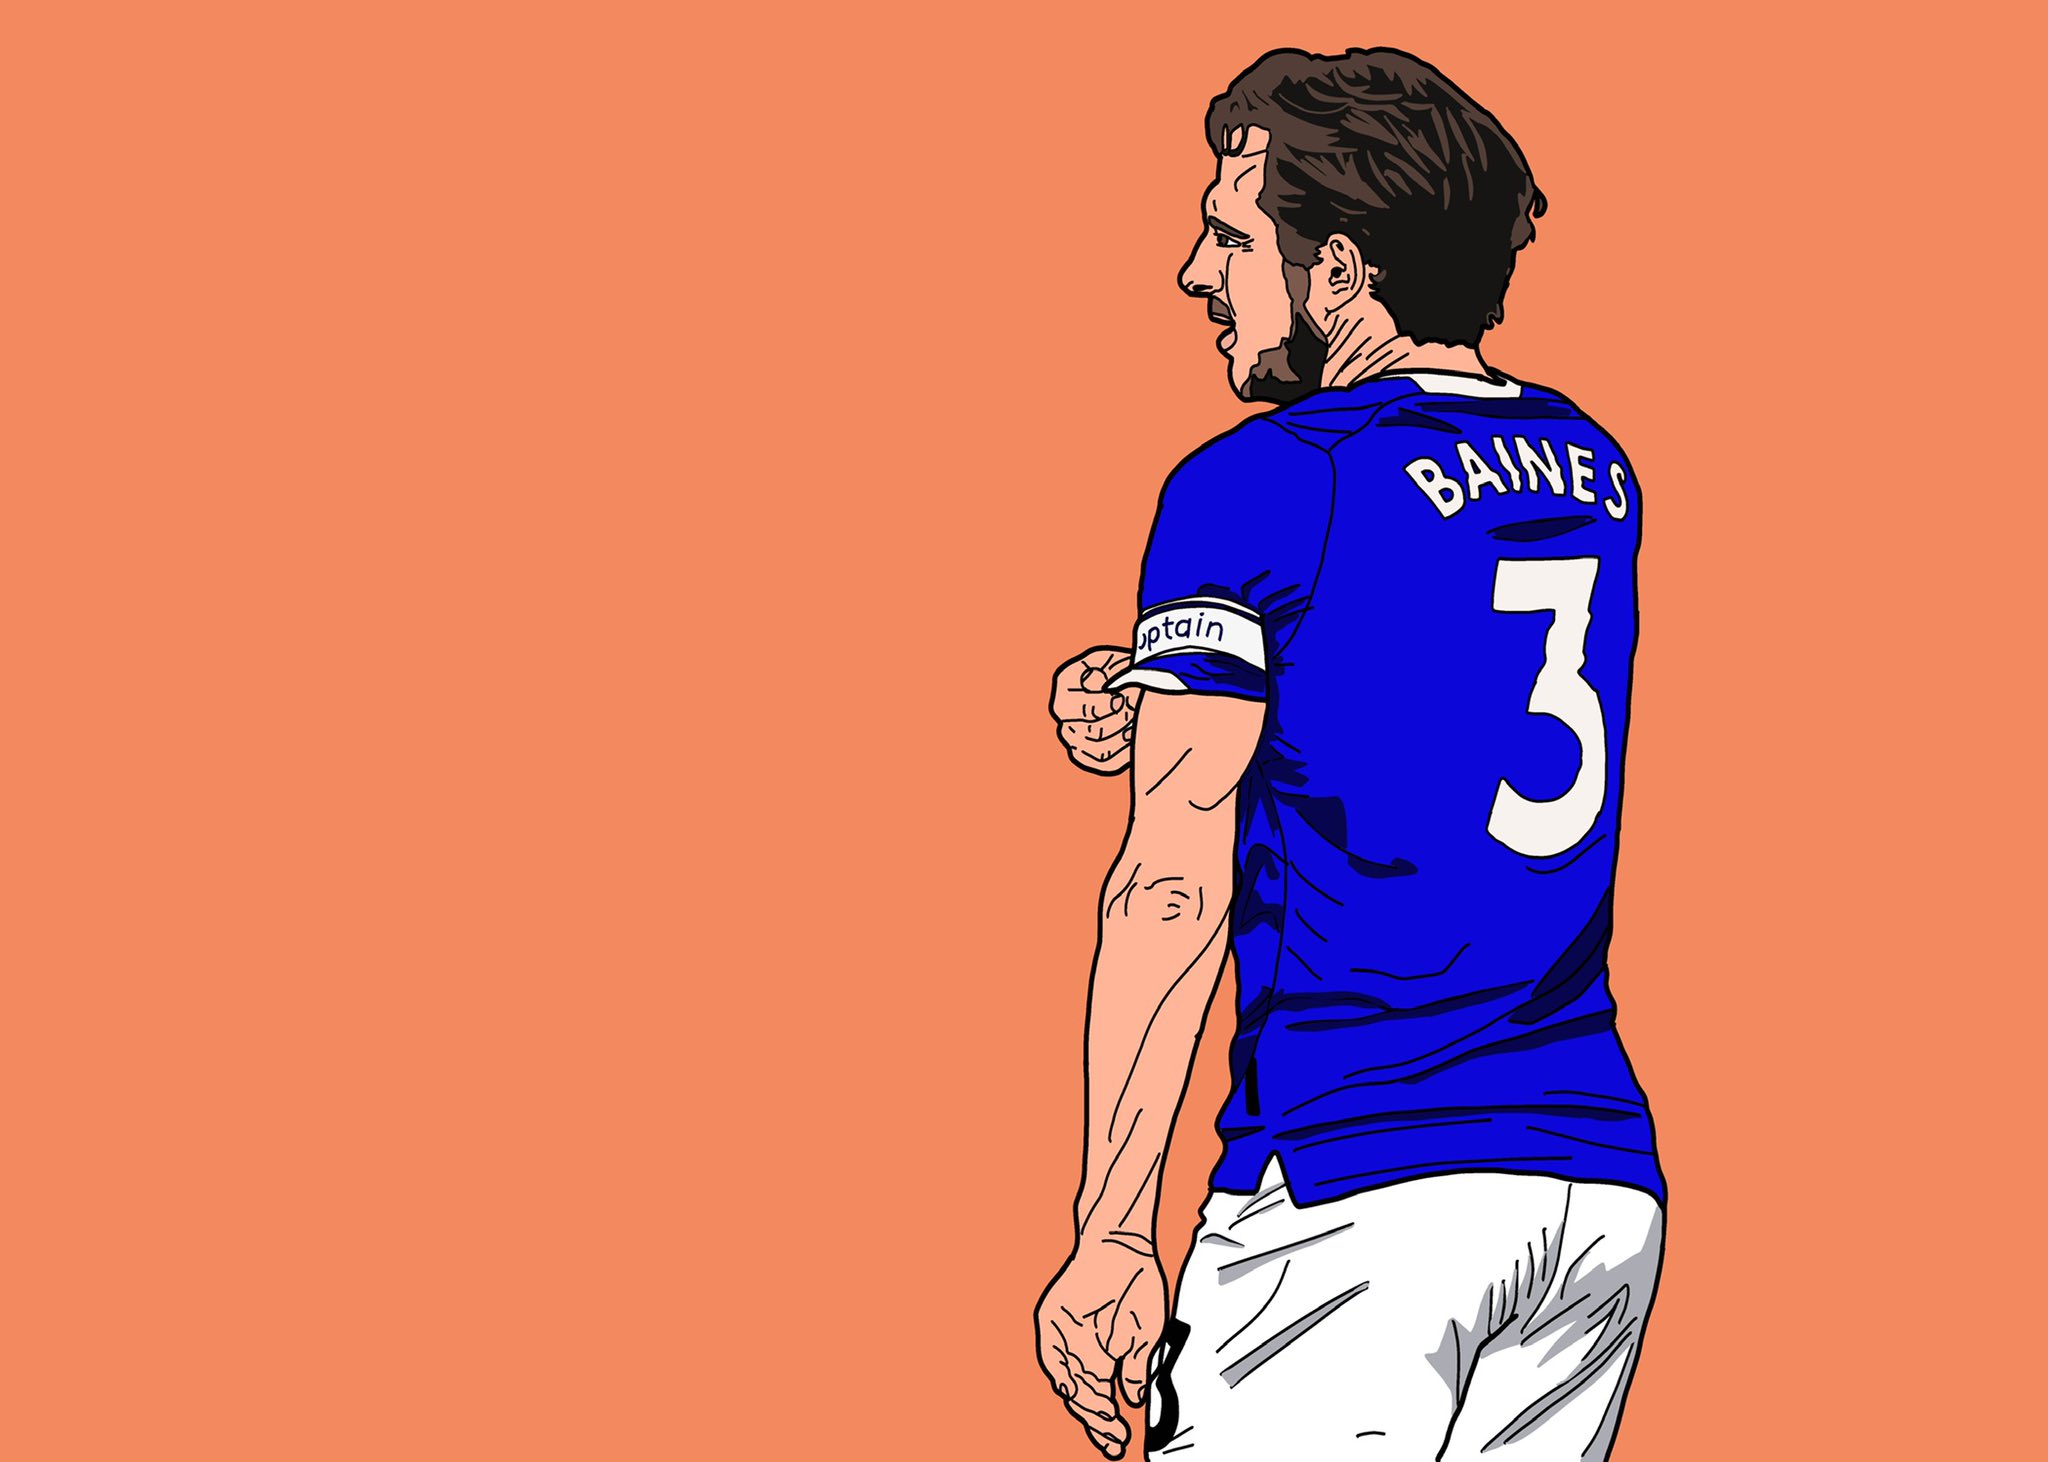 Happy Birthday to the ultimate professional. Everything we want in an Everton player. Leighton Baines our number 3. 